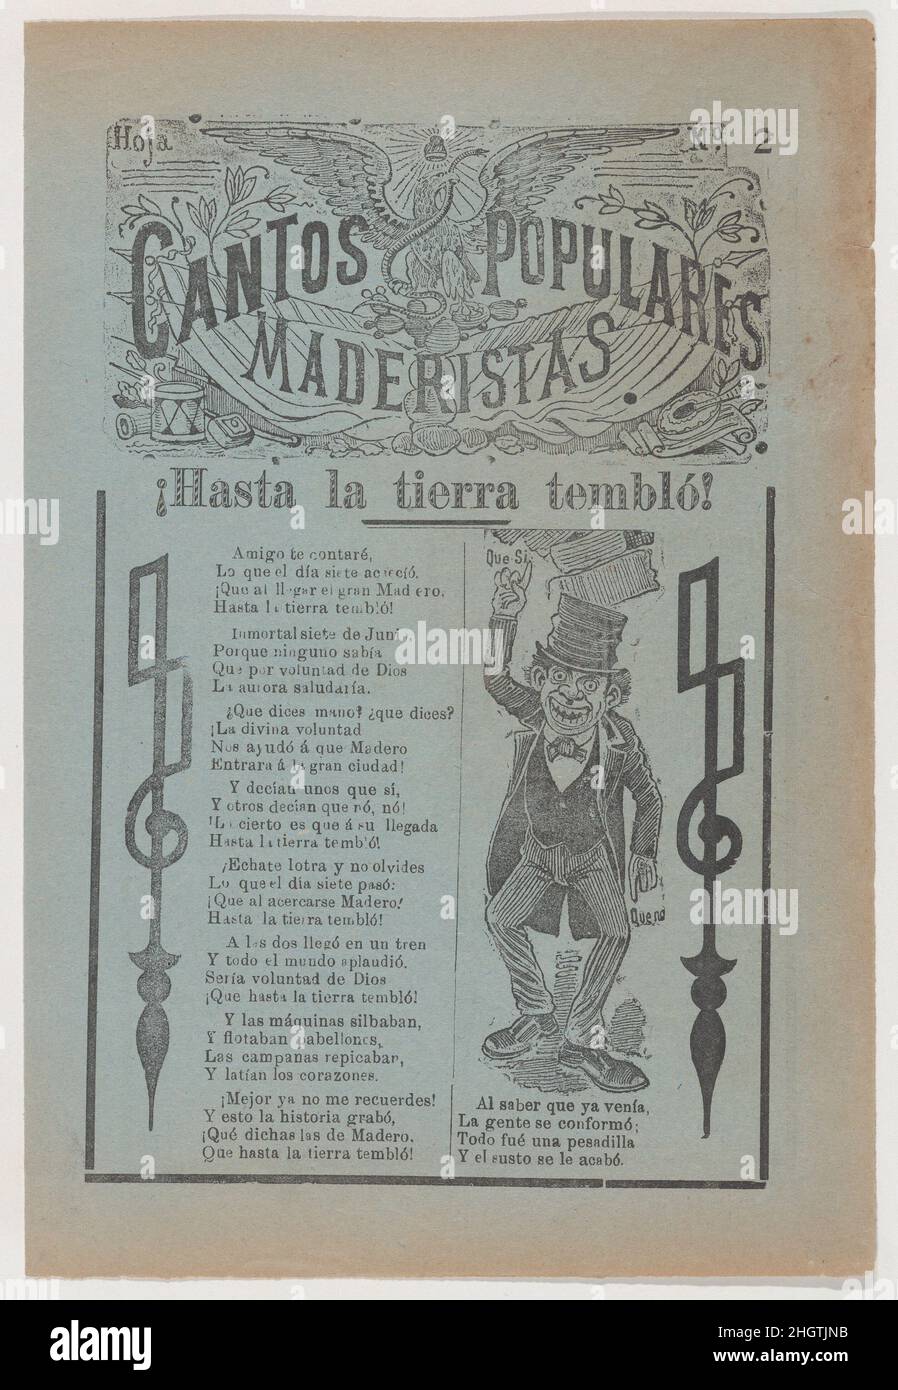 Broadsheet celebrating one of the founders of the Mexican Revolution, Francisco Madero, shown in a suit and top hat pointing to the phrases 'Que Si' and 'Que No' ca. 1911 José Guadalupe Posada. Broadsheet celebrating one of the founders of the Mexican Revolution, Francisco Madero, shown in a suit and top hat pointing to the phrases 'Que Si' and 'Que No'. José Guadalupe Posada (Mexican, 1851–1913). ca. 1911. Photo-relief and letterpress on gray paper. Antonio Vanegas Arroyo (1850–1917, Mexican). Prints Stock Photo